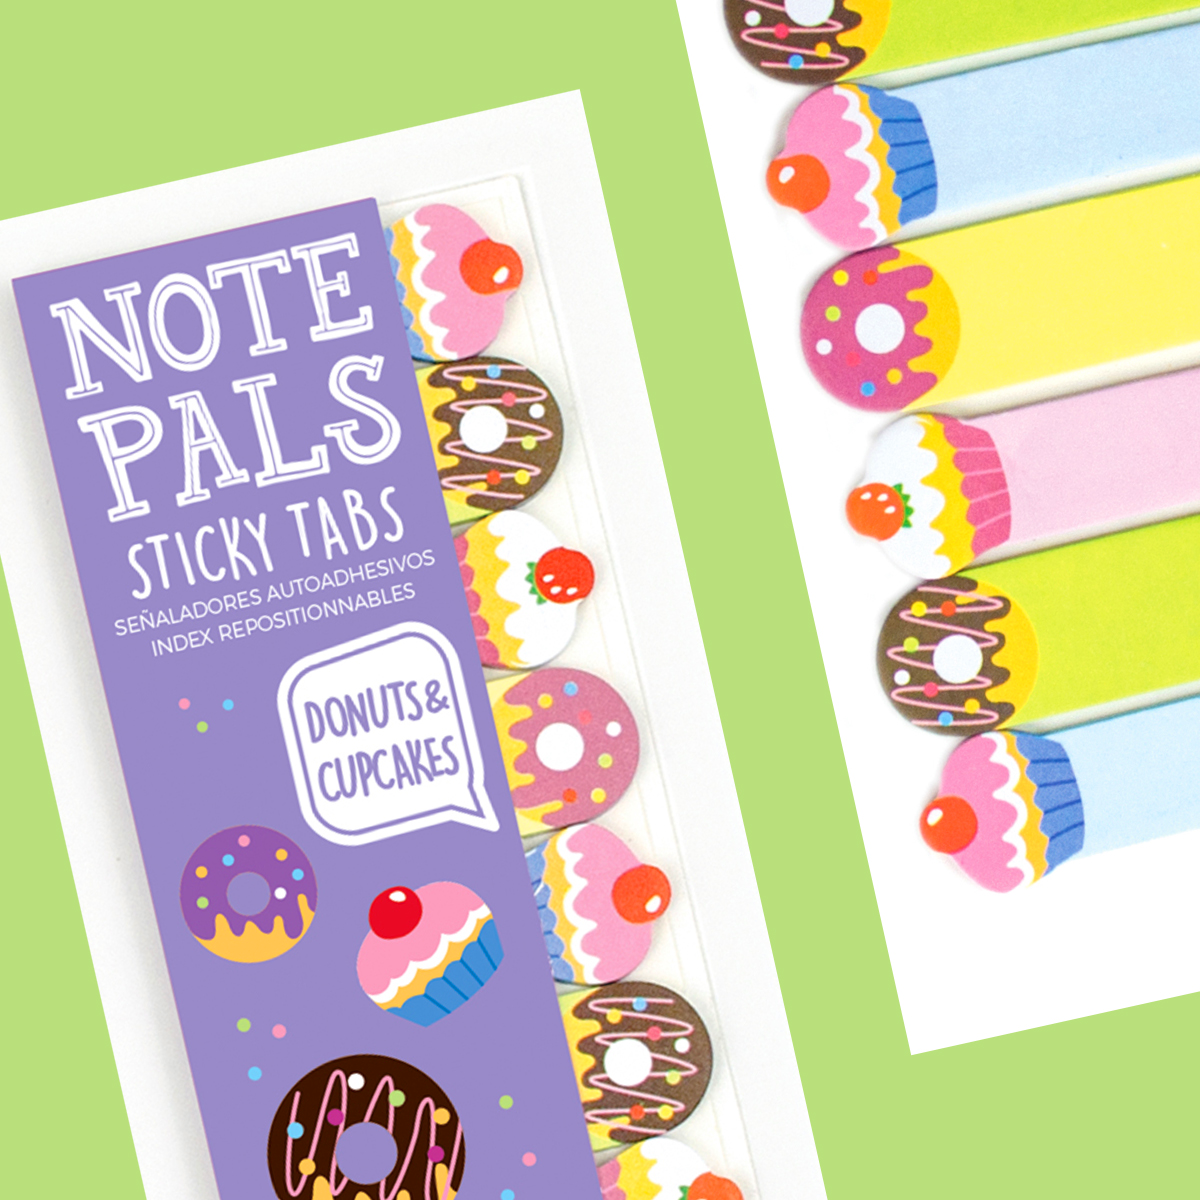 Note Pals Sticky Note Tabs - Cool Treats – Modern Legacy Paper Company